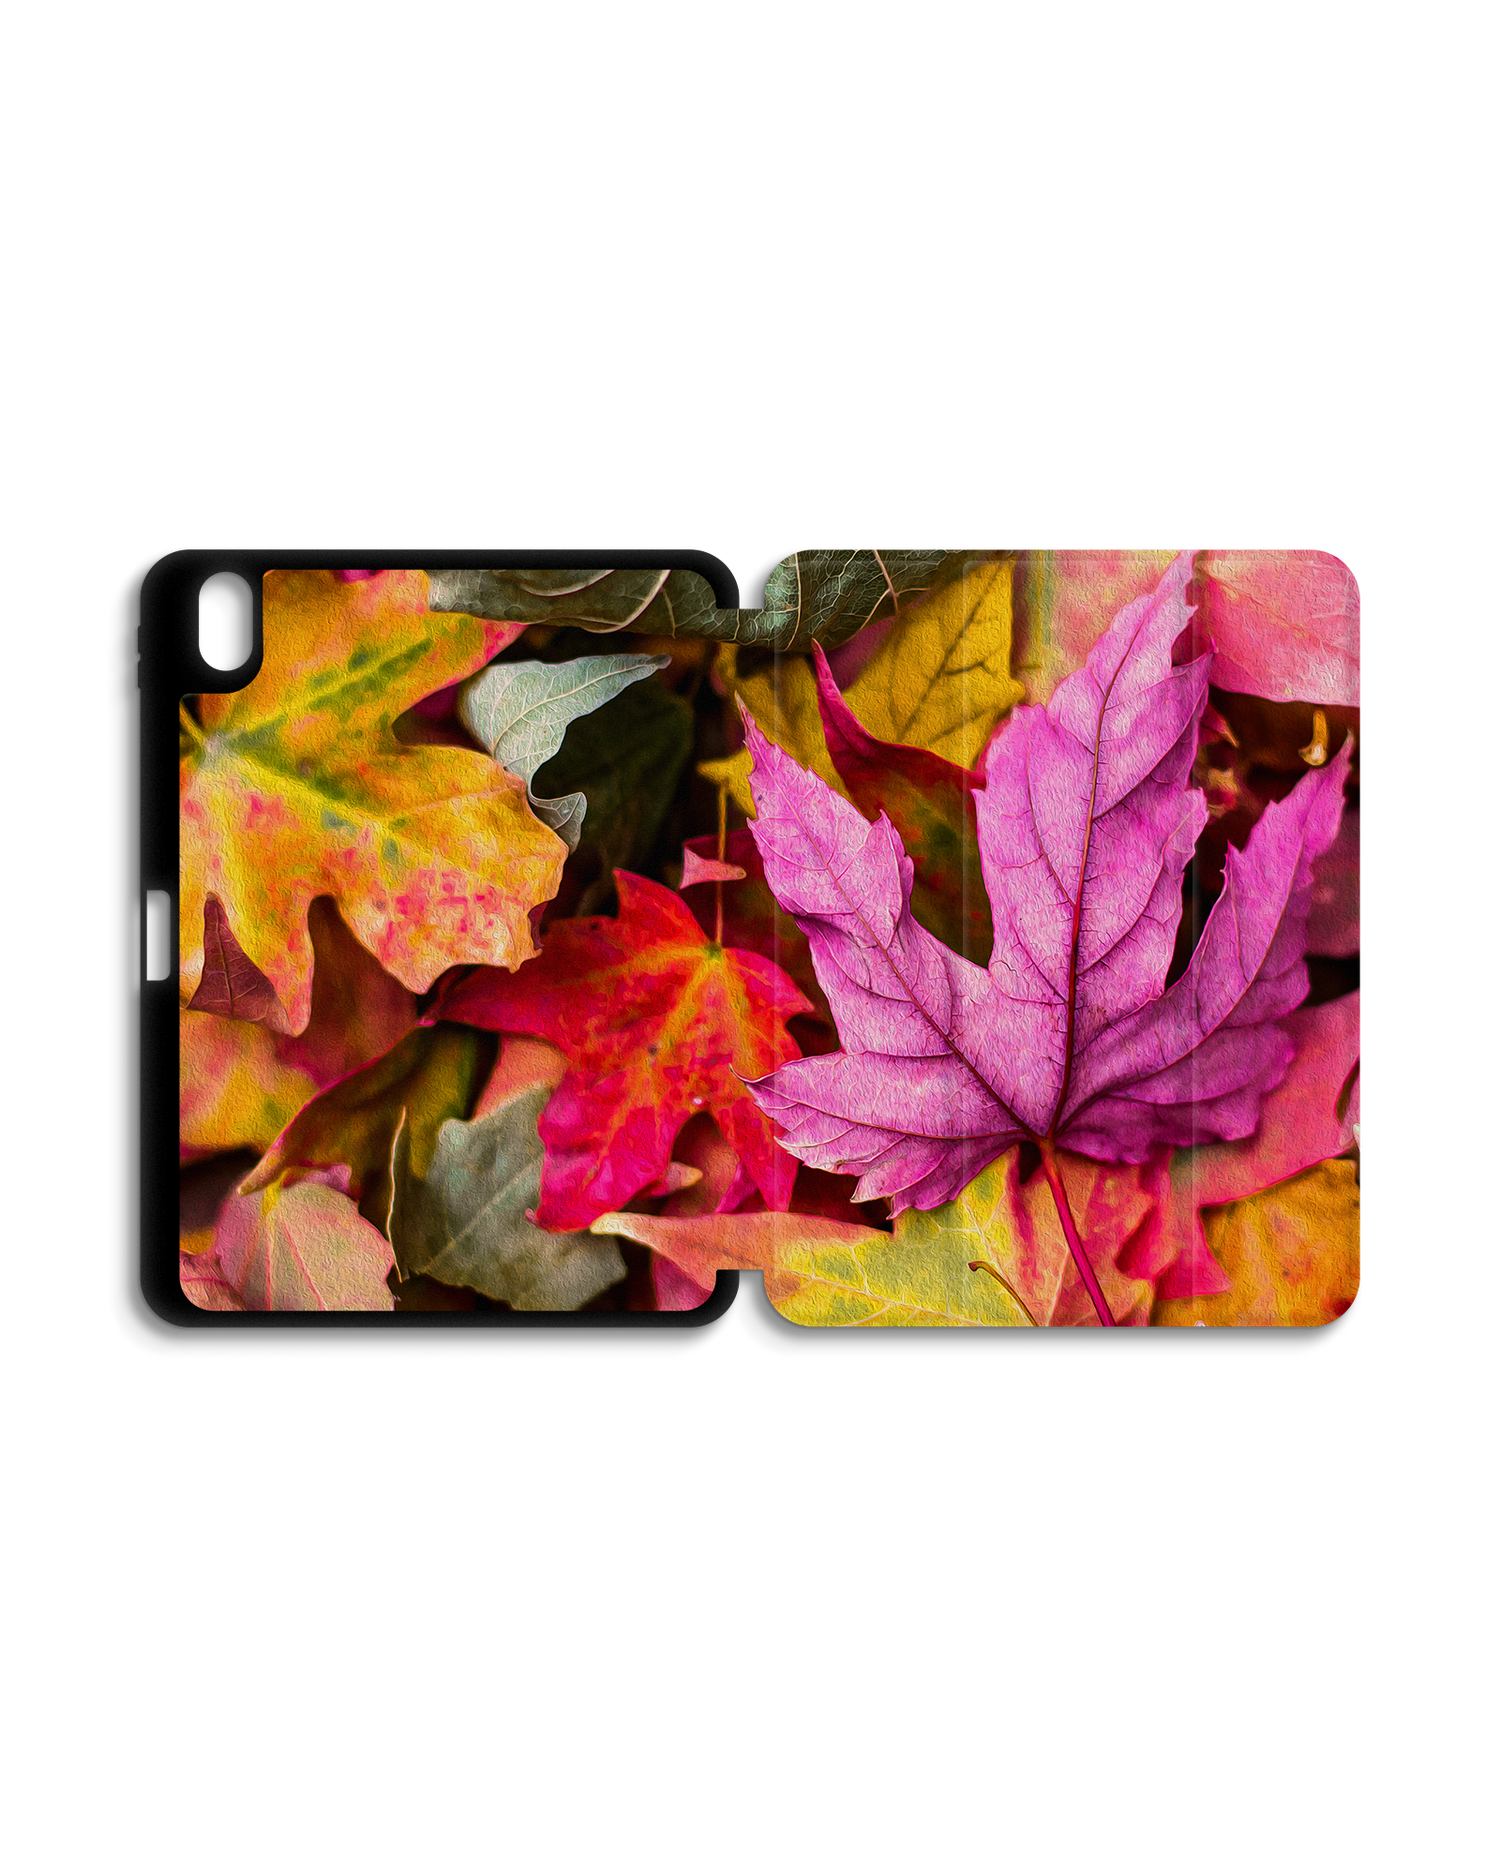 Autumn Leaves iPad Case with Pencil Holder for Apple iPad (10th Generation): Opened exterior view